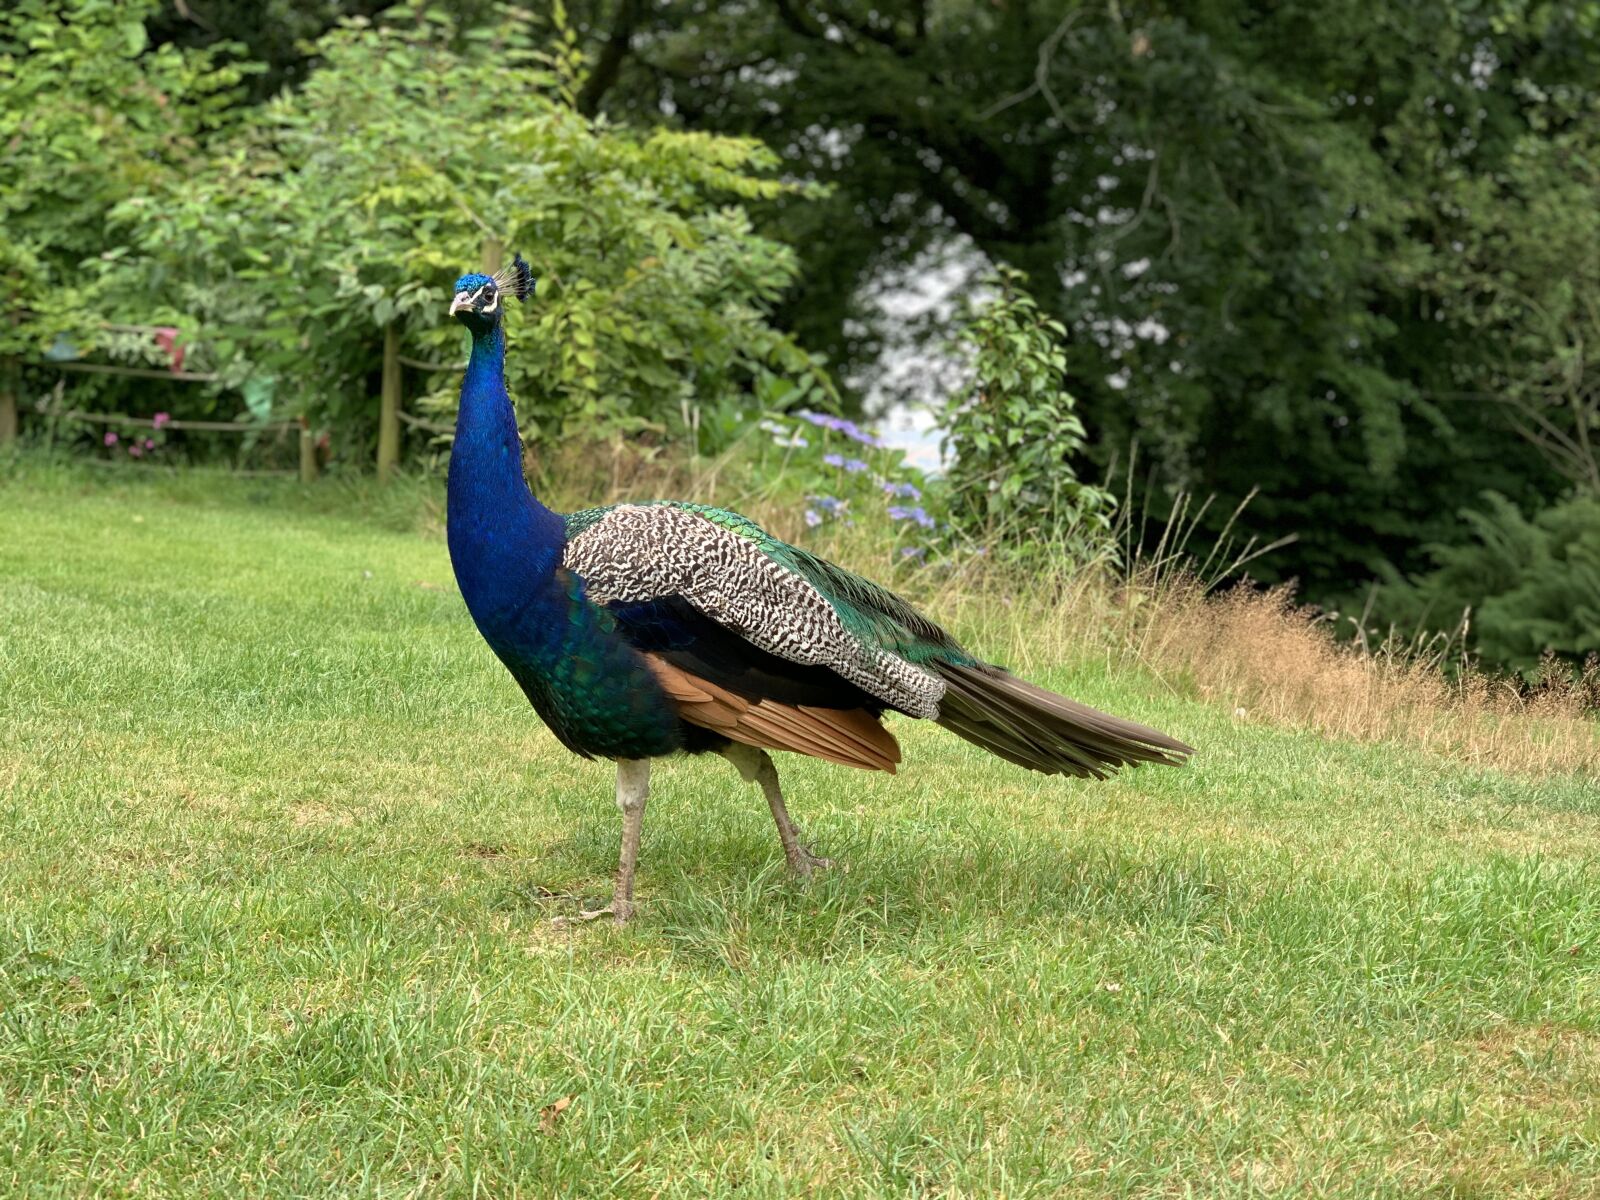 Apple iPhone XS Max + iPhone XS Max back dual camera 6mm f/2.4 sample photo. Peacock, bird, colorful photography